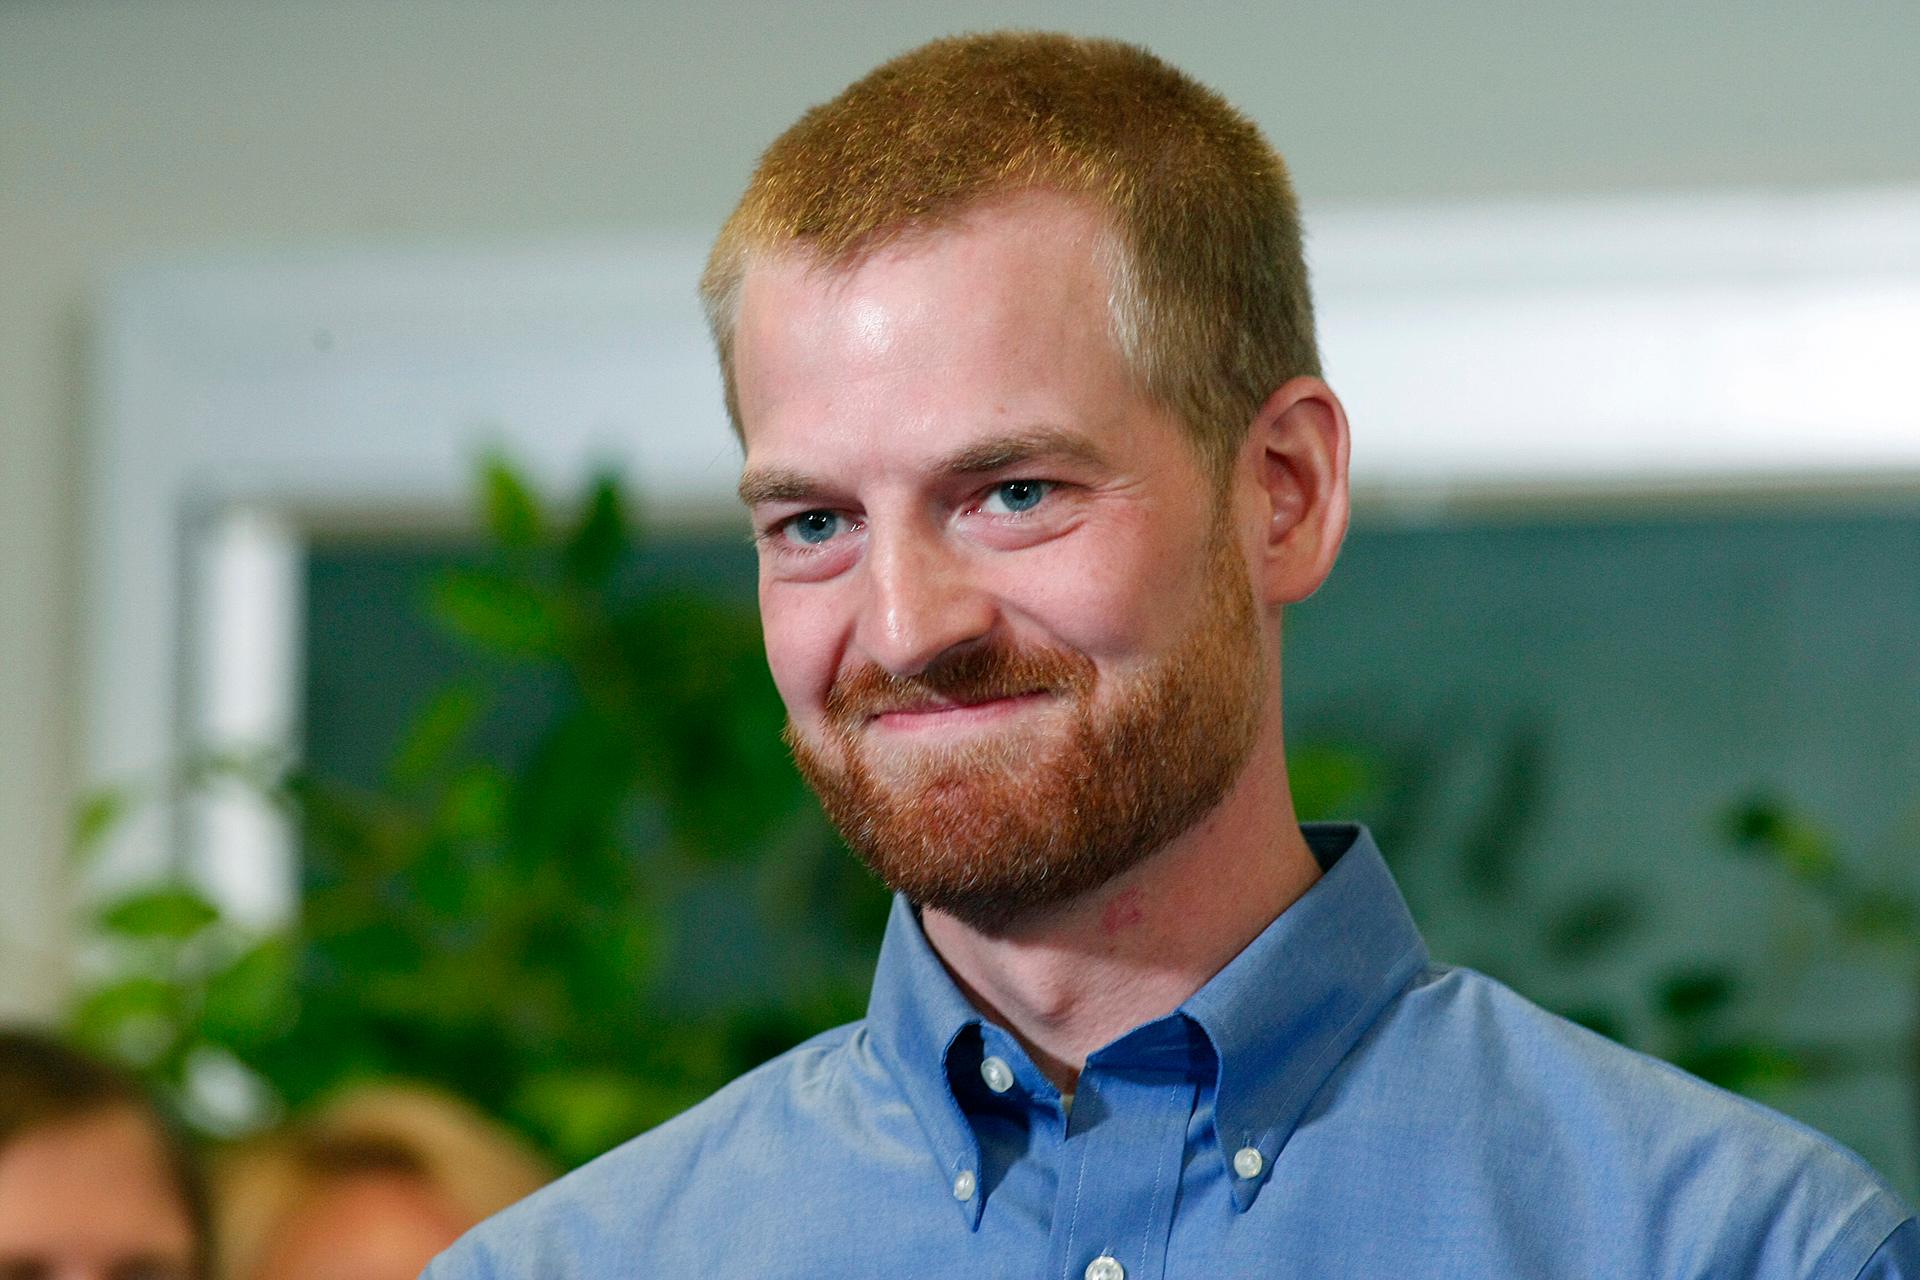 Kent Brantly, who contracted the deadly Ebola virus, smiles during a press conference at Emory University Hospital in Atlanta, Georgia. Brantly along with a second American aid worker who contracted Ebola while treating victims of the deadly virus in Libe